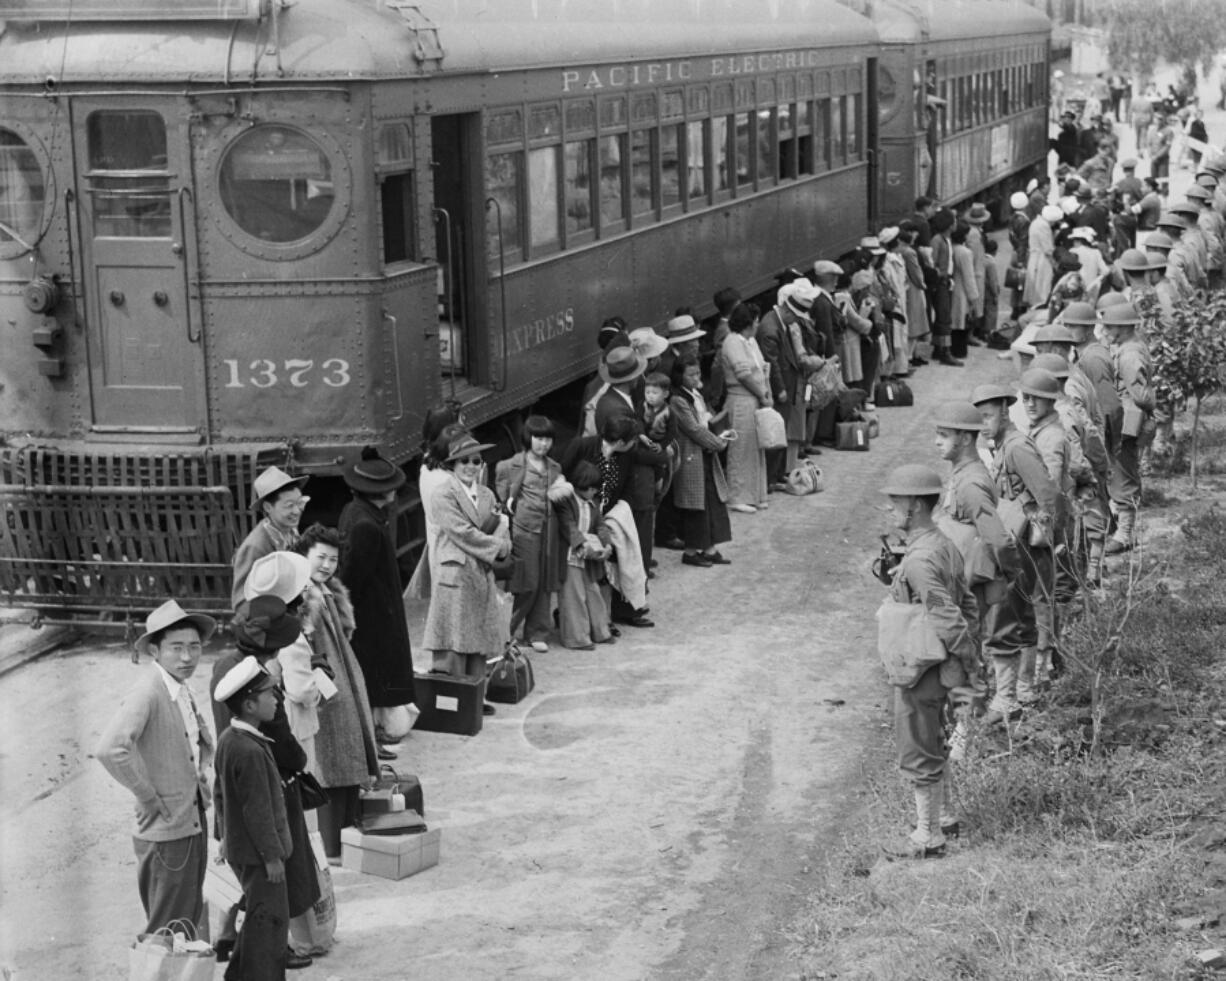 In this photo provided by the National Archives, Japanese Americans from San Pedro, Calif., arrive at the Santa Anita Assembly Center in Arcadia, Calif., on April 5, 1942. People were temporarily housed at this center at the Santa Anita race track before being moved inland to internment camps during World War II.